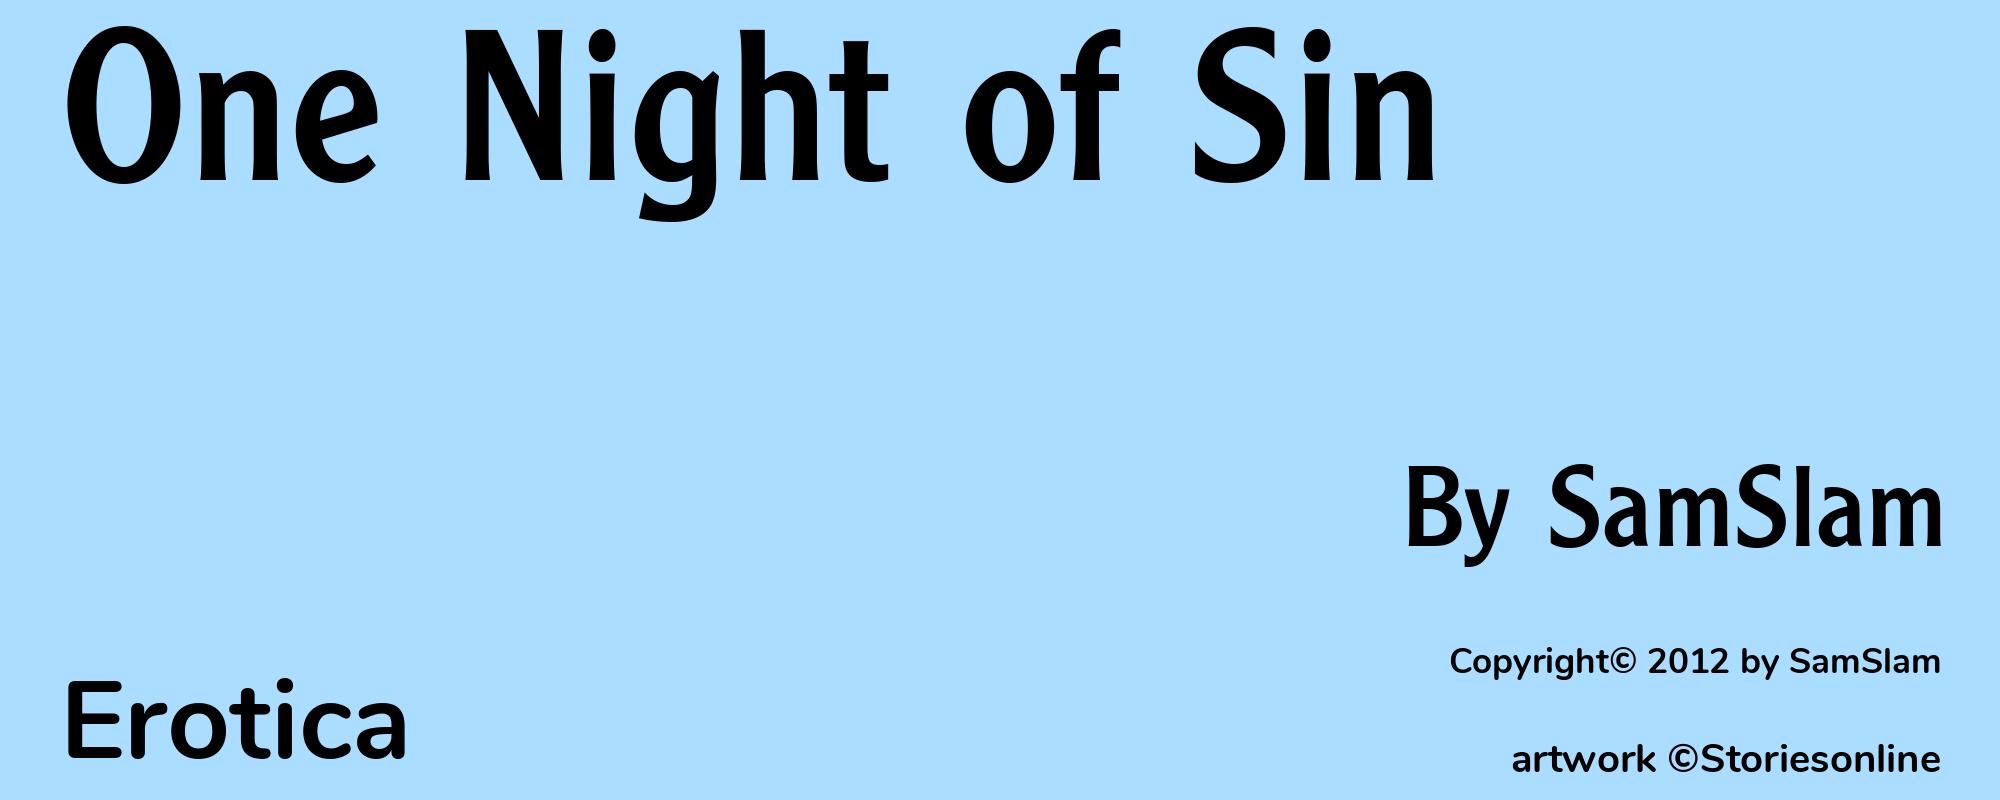 One Night of Sin - Cover